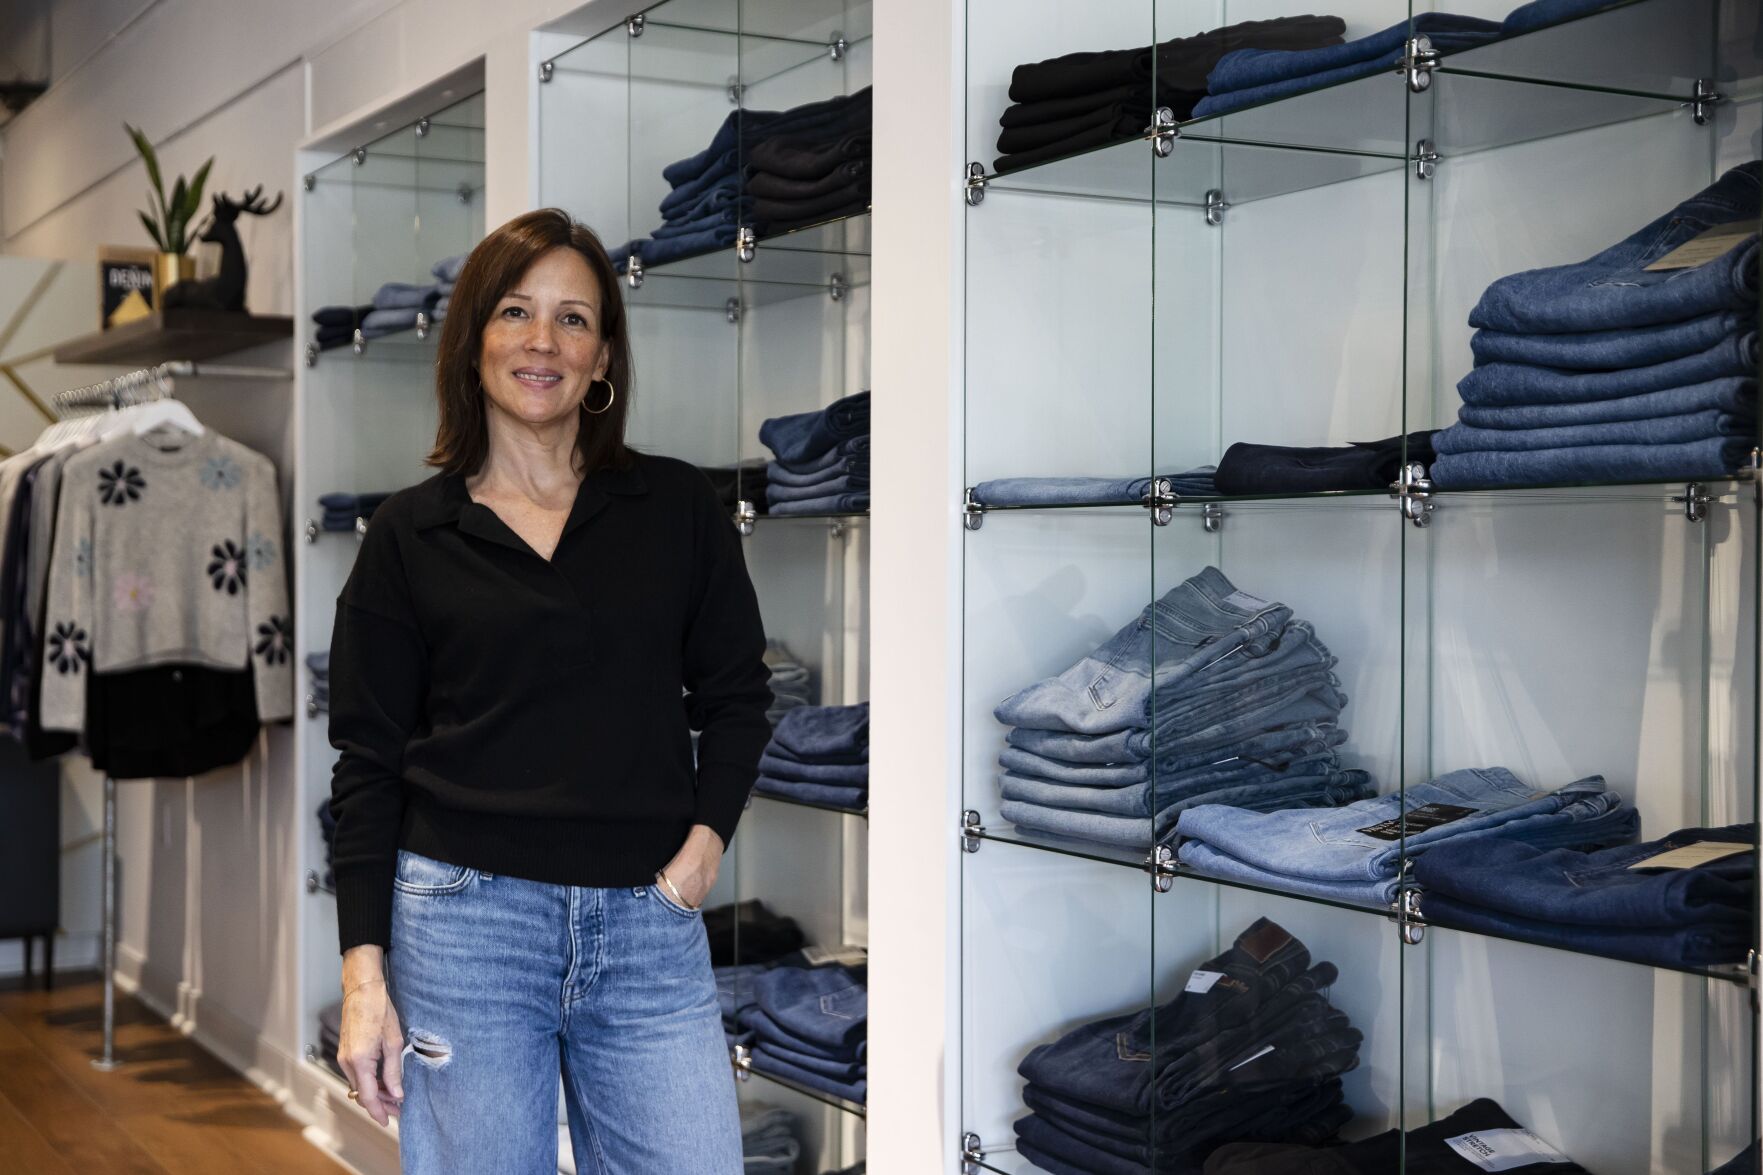 YMI Jeans Is Changing the Denim Industry - Daily Front Row